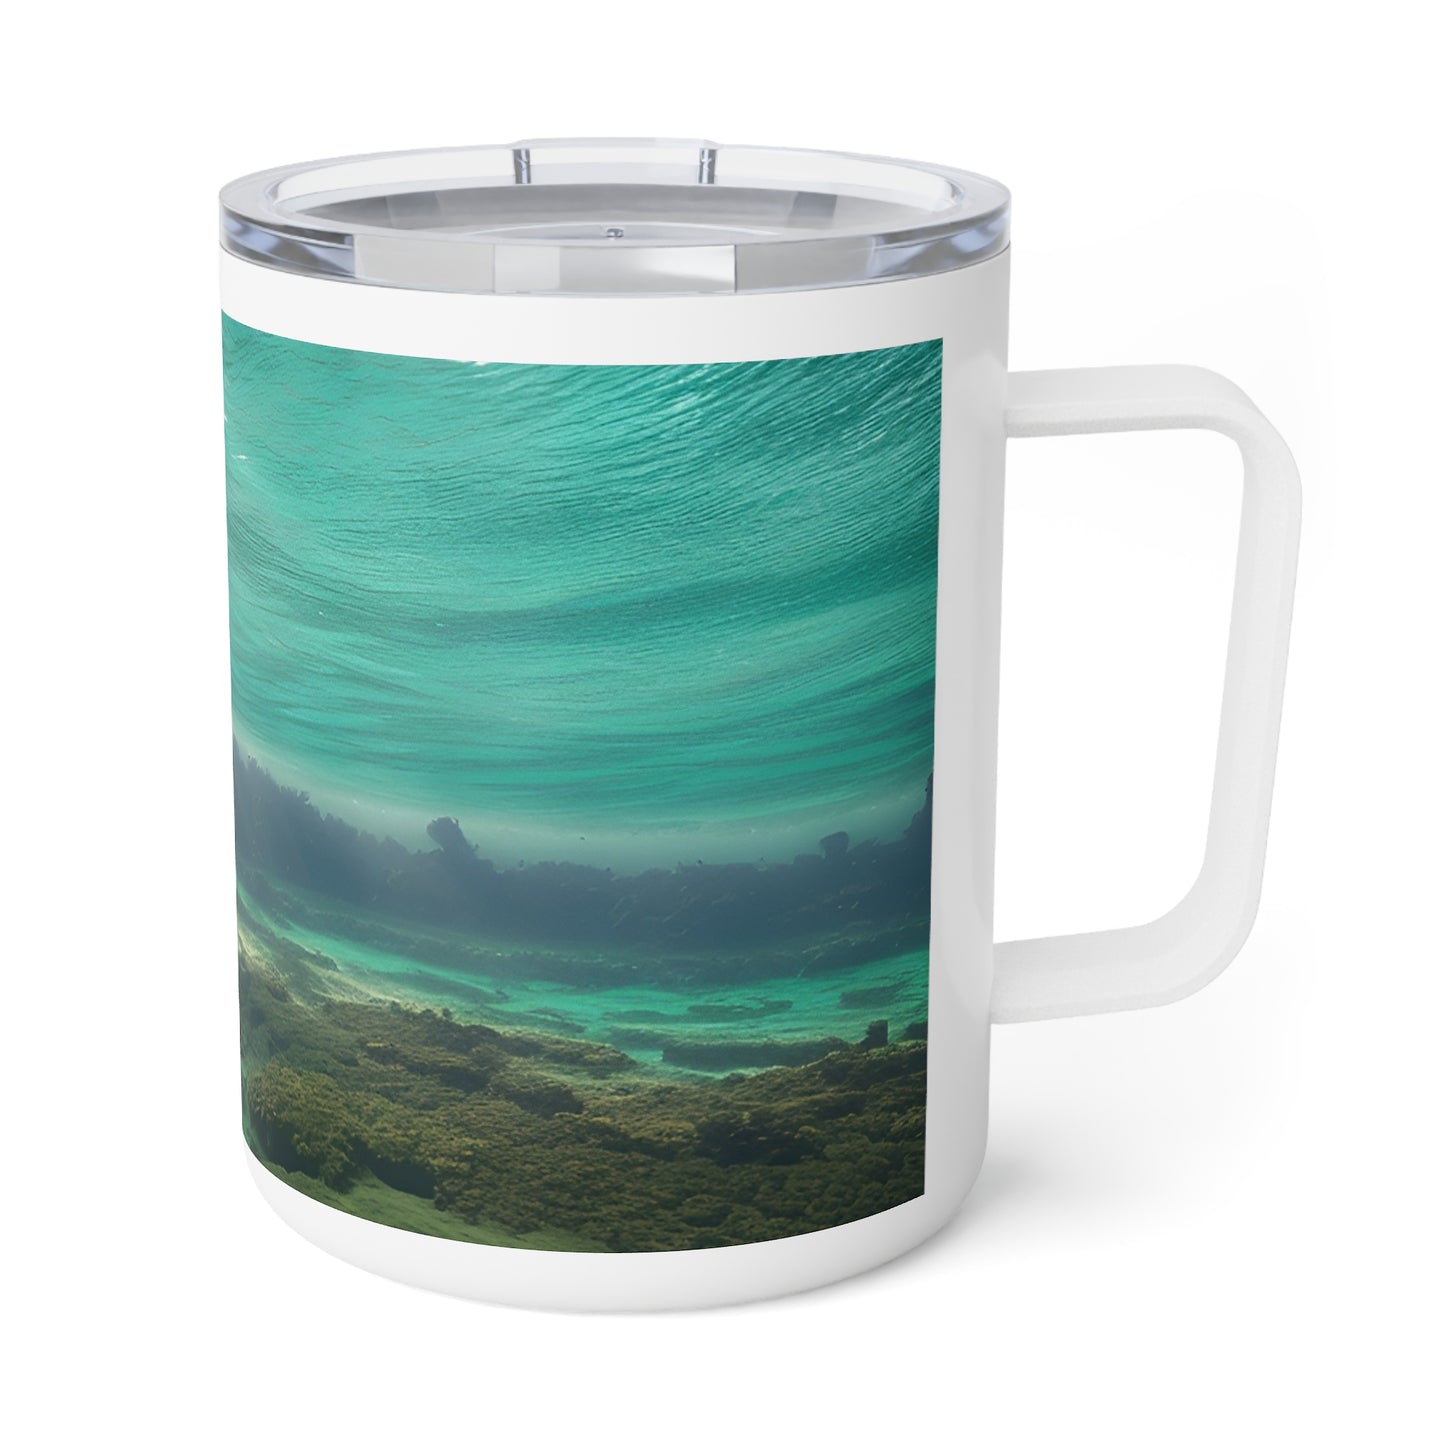 Under The Sea Insulated Coffee Mug, 10oz (SP Photography Collection)